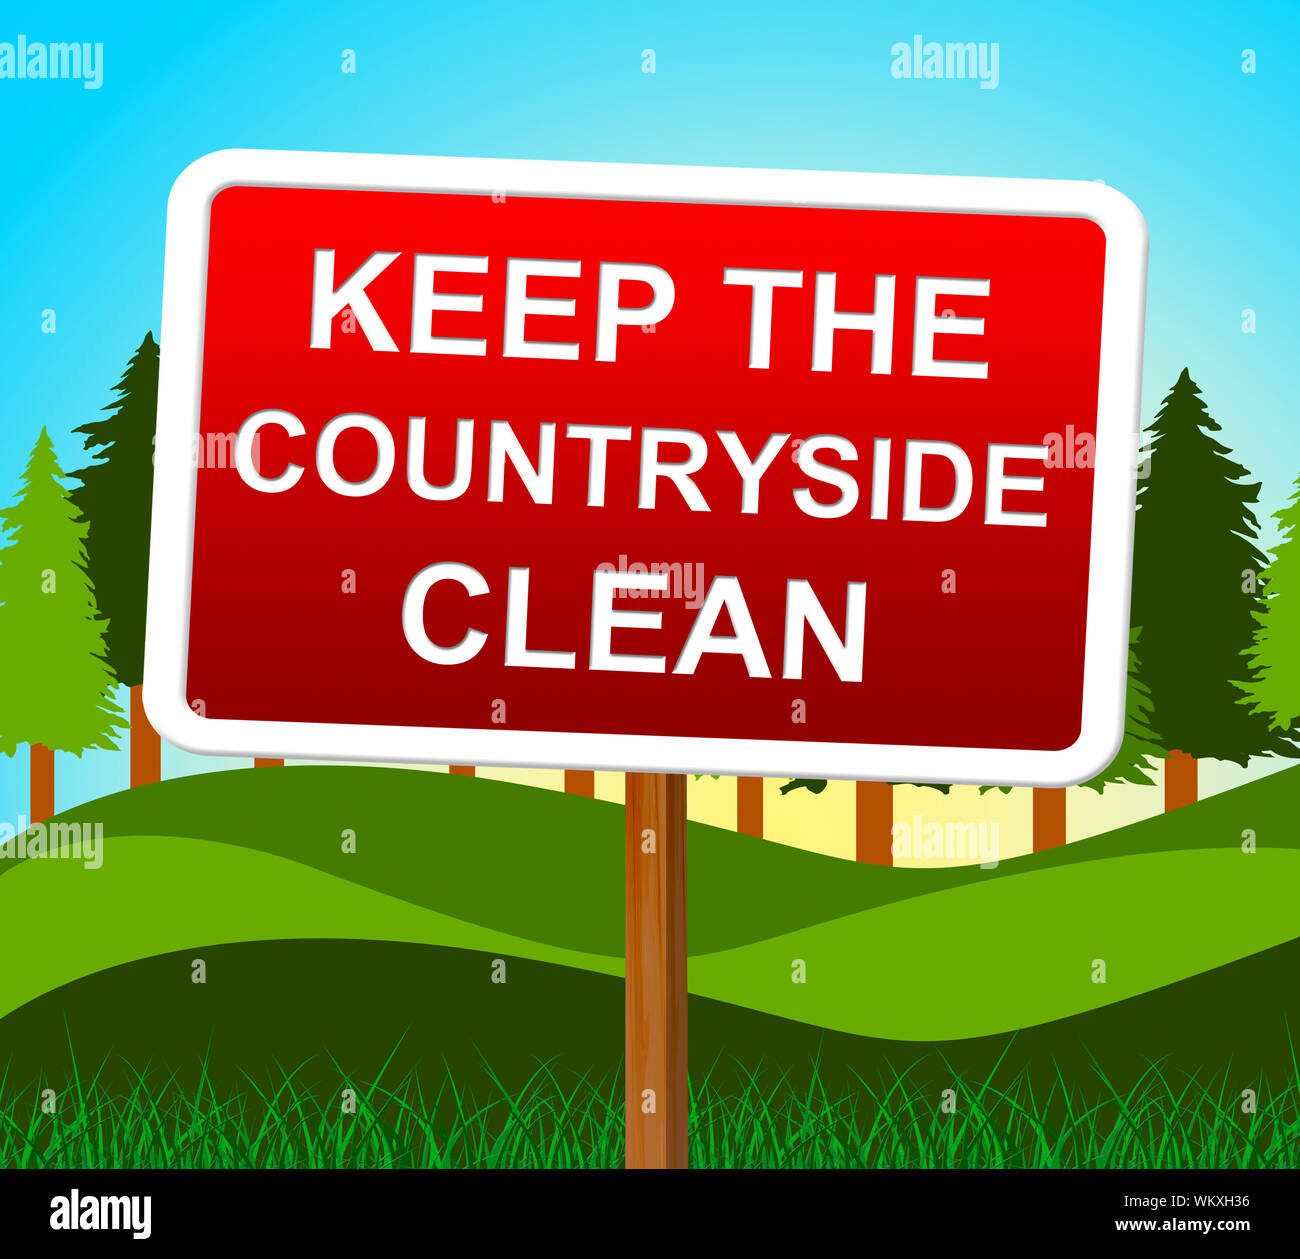 Keep Countryside Clean Meaning Pristine Natural And Landscape Stock Photo